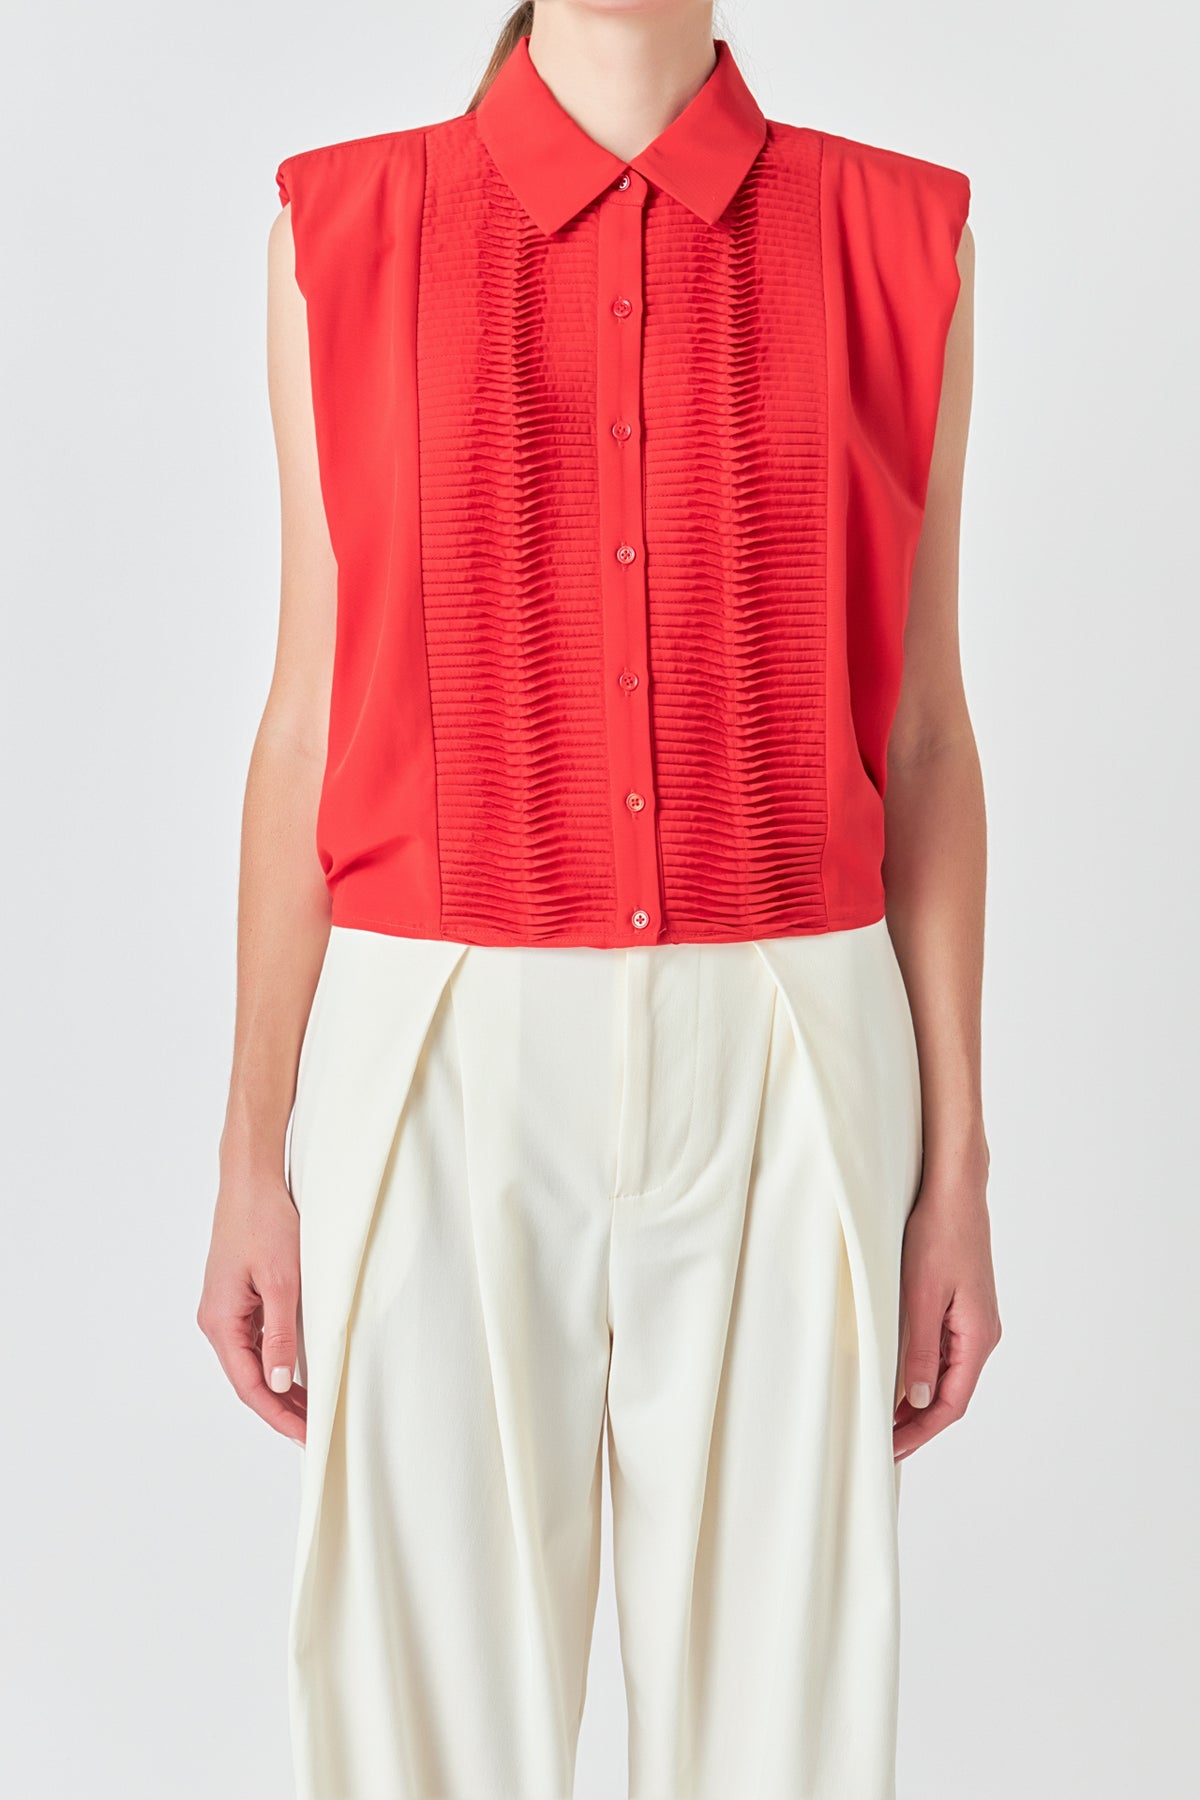 ENDLESS ROSE - Pintuck Details Sleeveless Blouse - SHIRTS & BLOUSES available at Objectrare